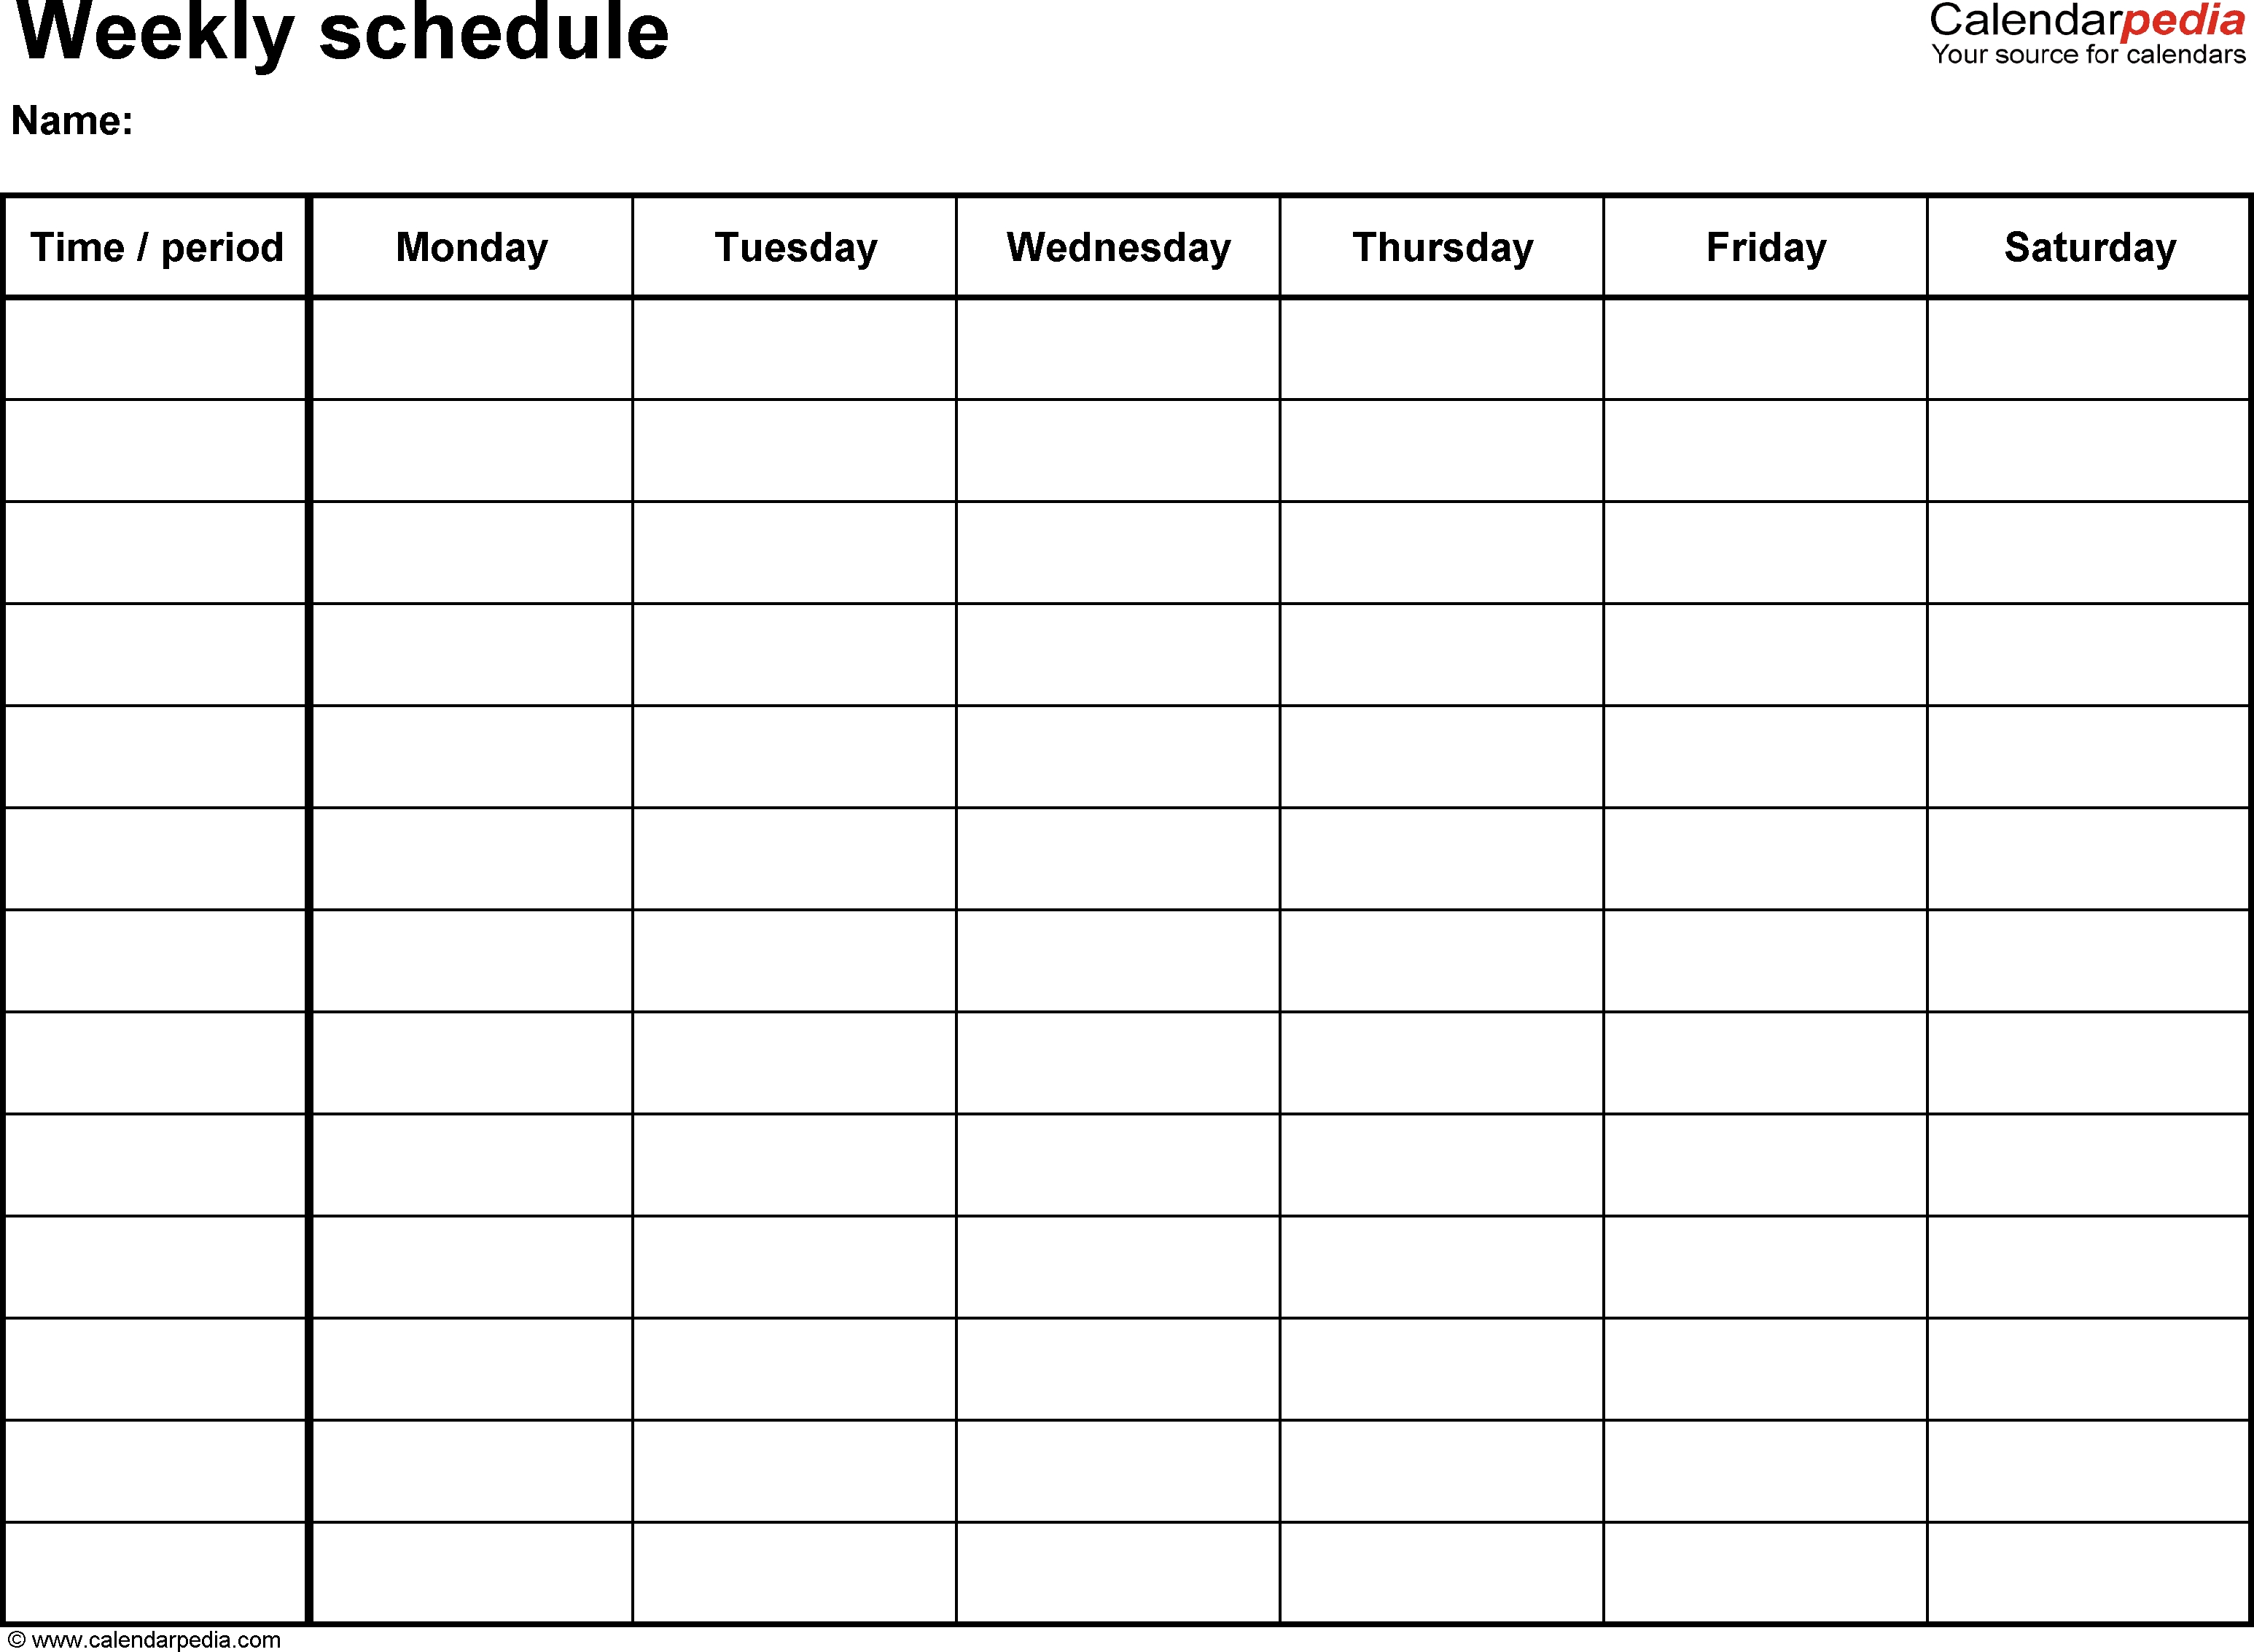 Free Weekly Schedule Templates For Word - 18 Templates-Summer Camp Calendar Template Blank